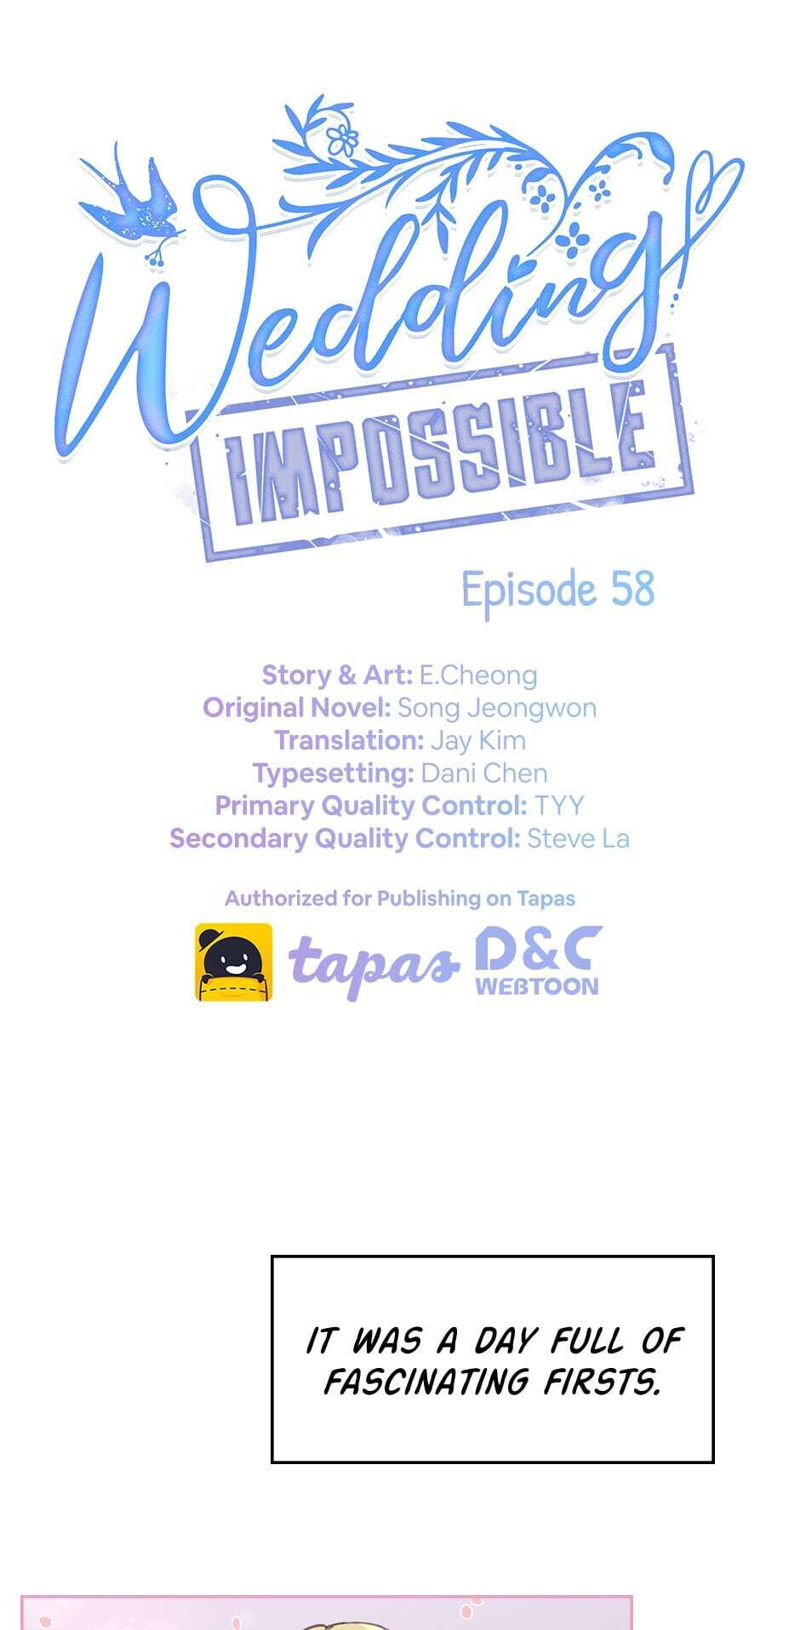 Wedding Impossible Chapter 58 page 1